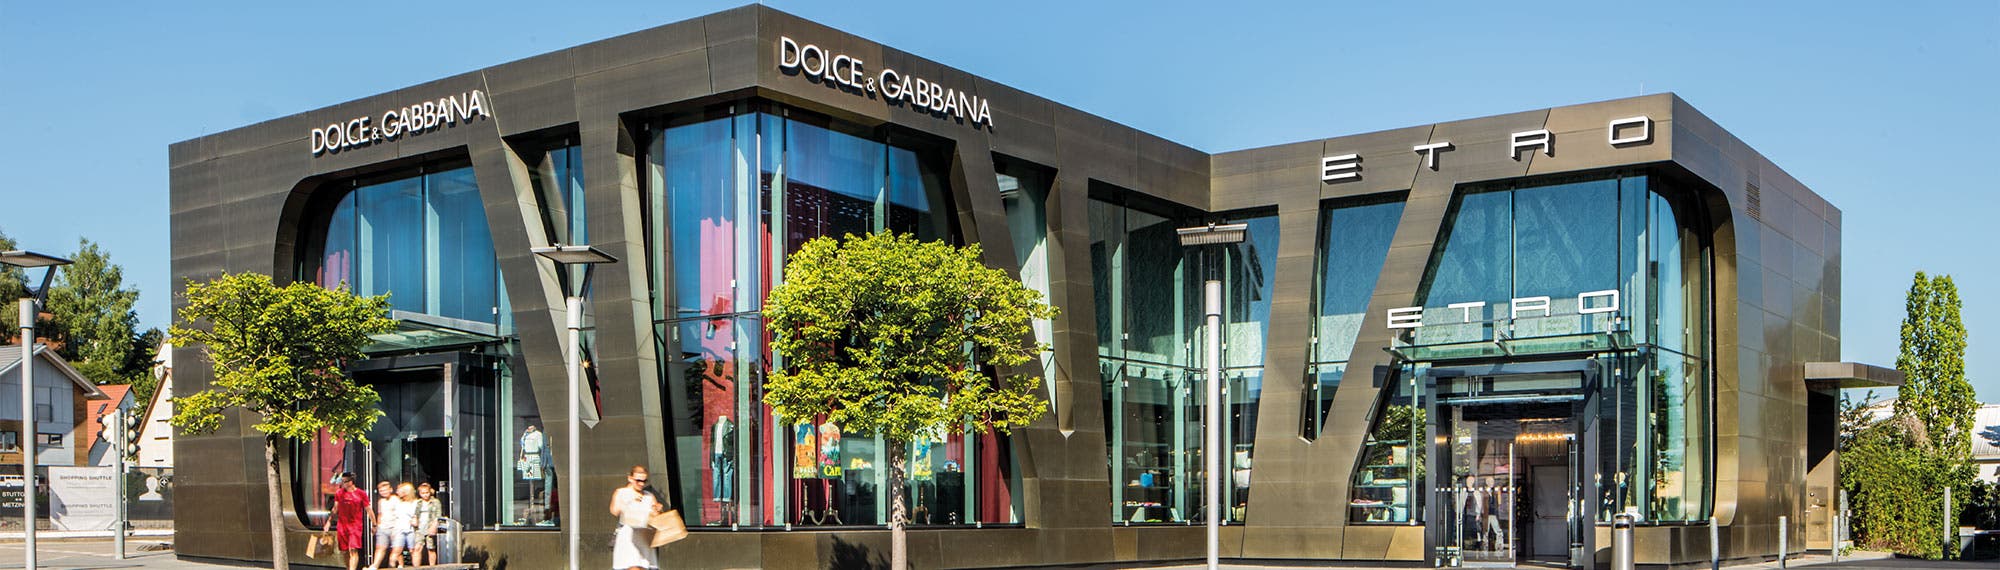 instant parachute speel piano Dolce & Gabbana OUTLET in Germany • Sale up to 70%* off | Outletcity  Metzingen